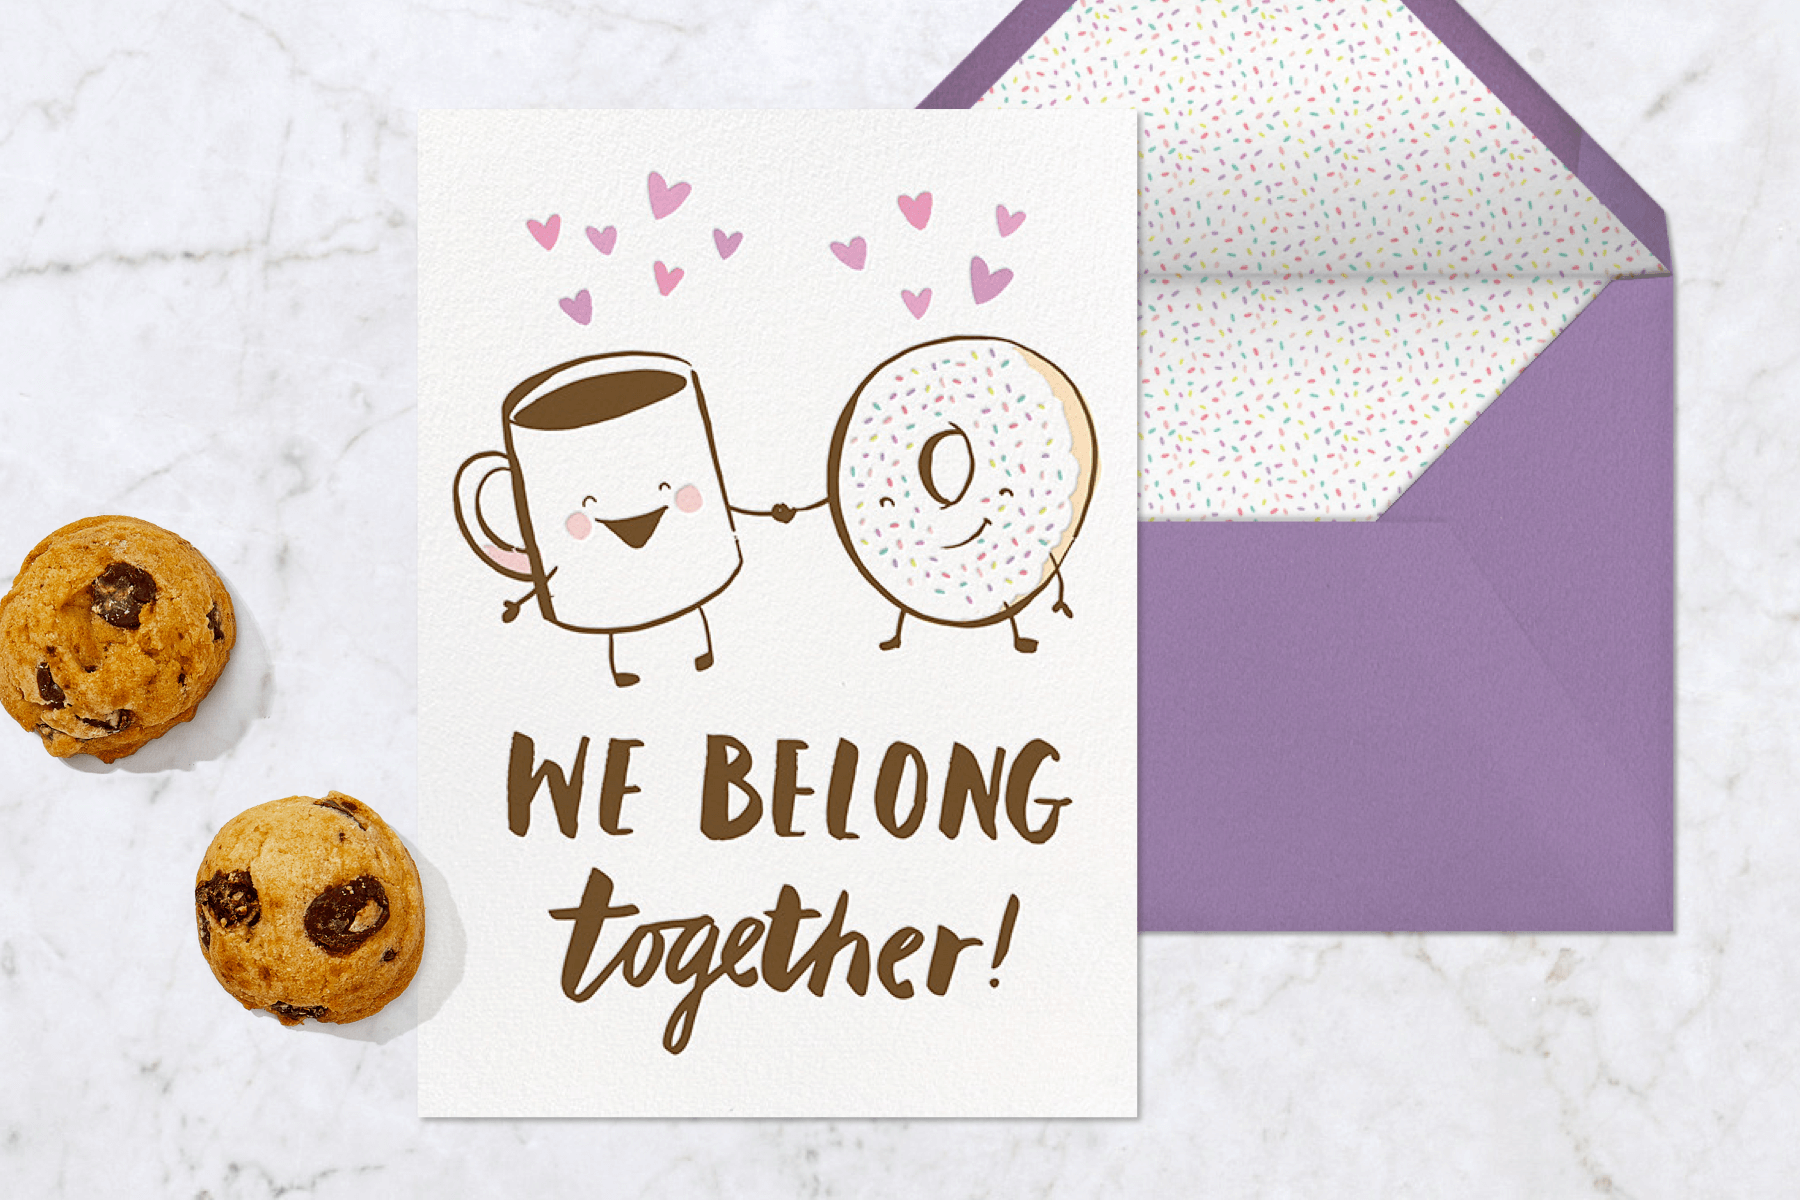 A card with an illustration of a coffee and a donut holding hands.